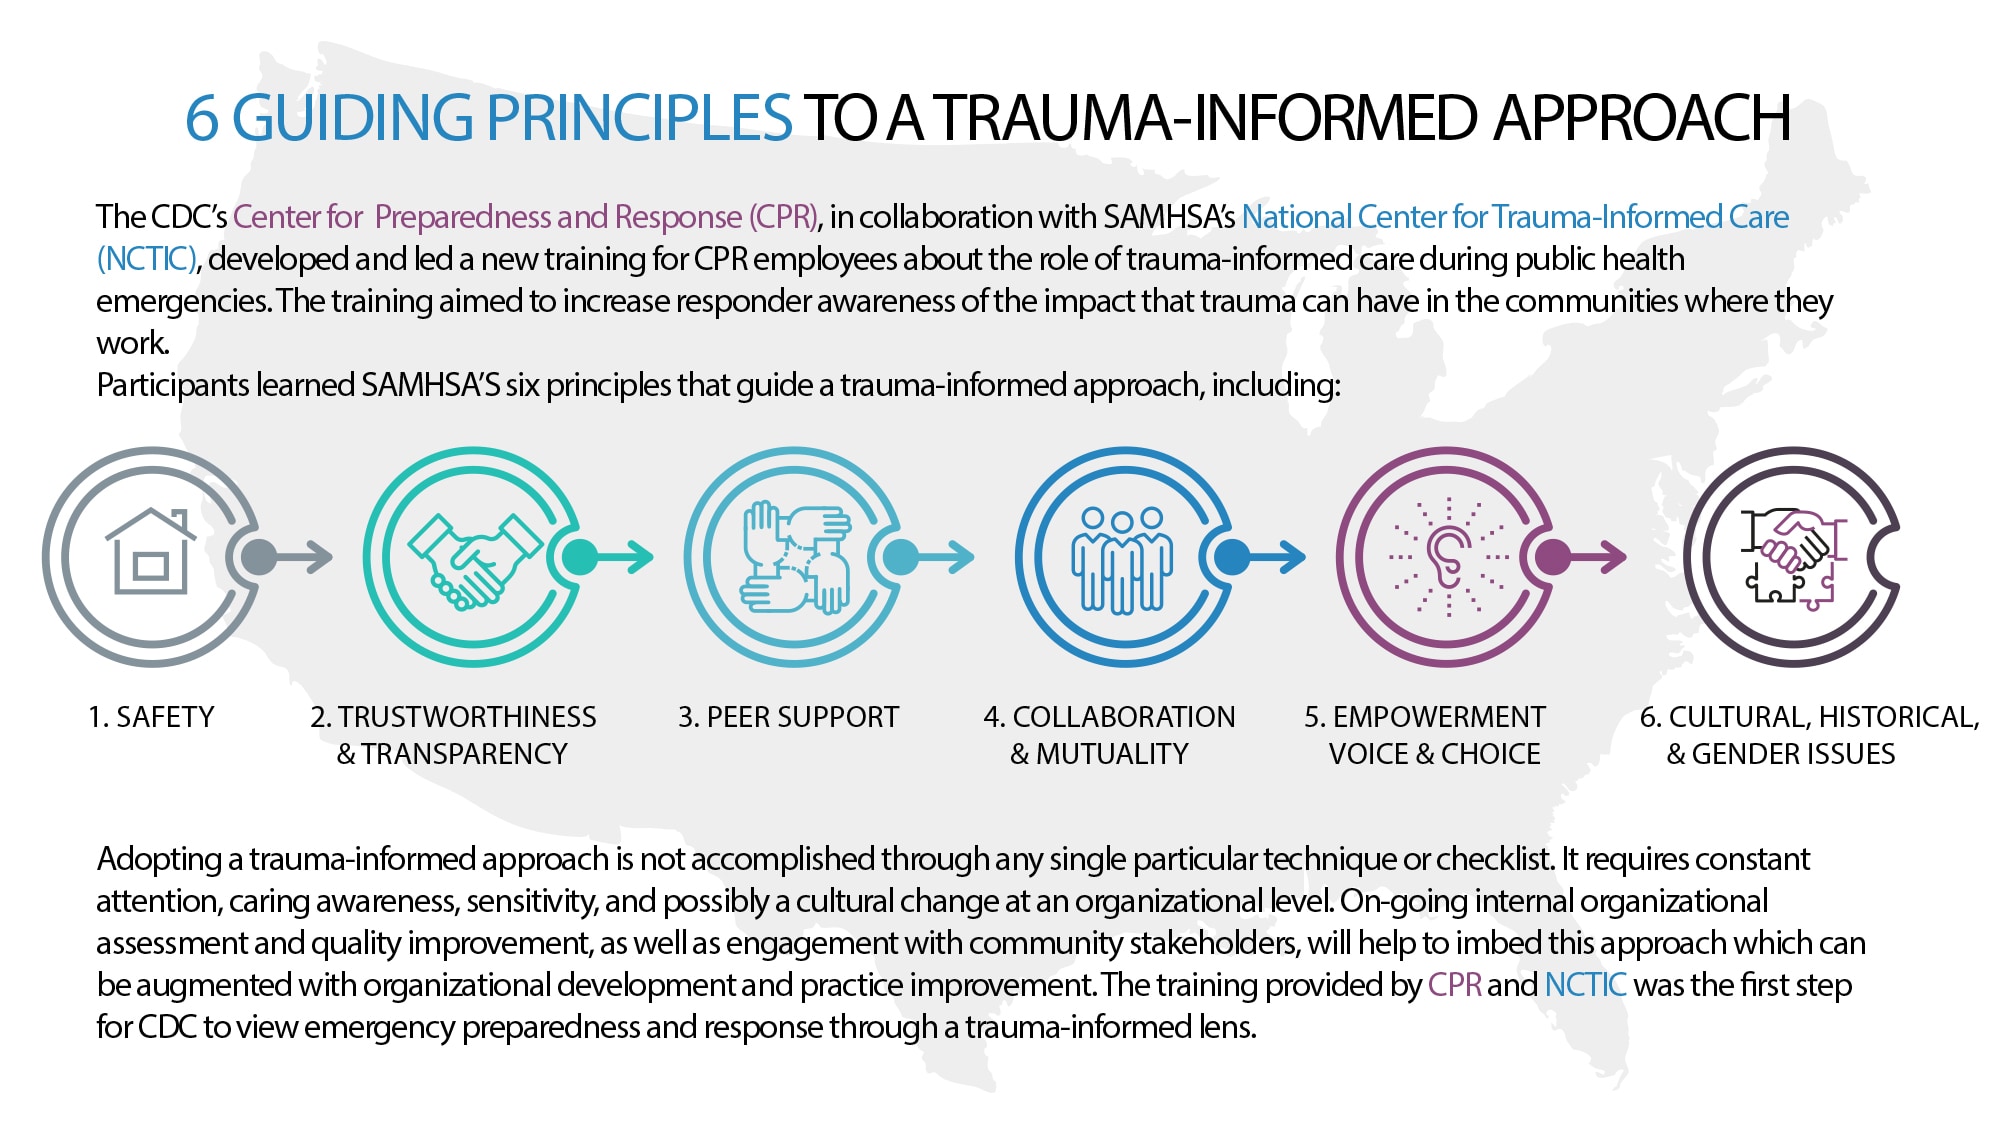 CDC Trauma Informed Principles include safety, trustworthiness and transparency, peer support, collaboration and mutuality, empowerment, voice and choice and lastly cultural, historical and gender issues